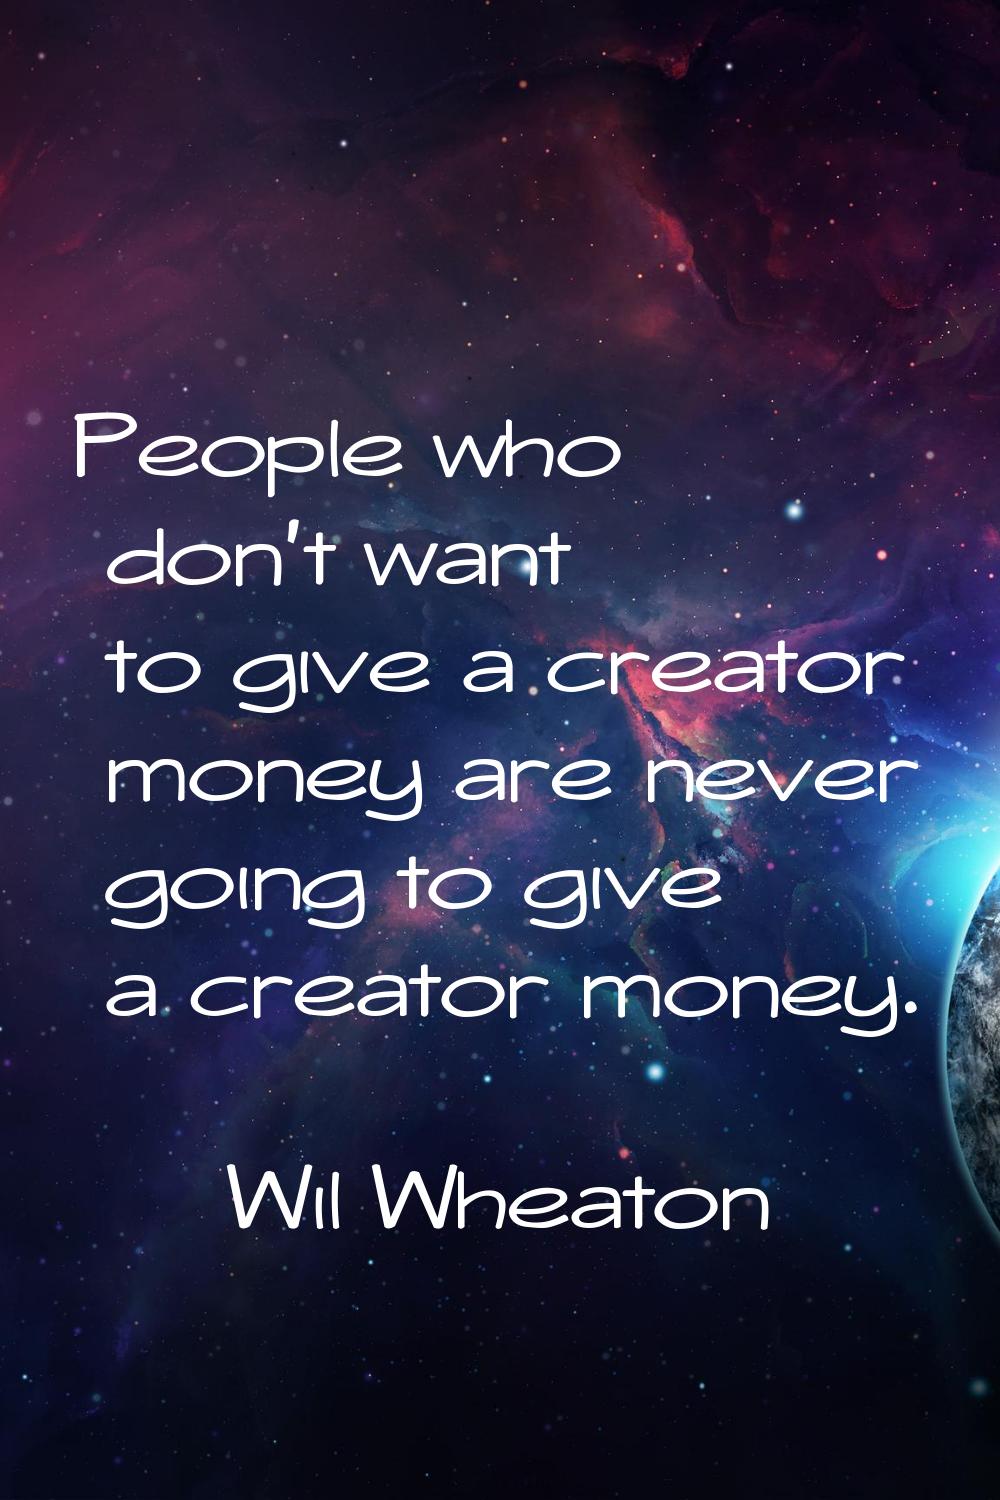 People who don't want to give a creator money are never going to give a creator money.